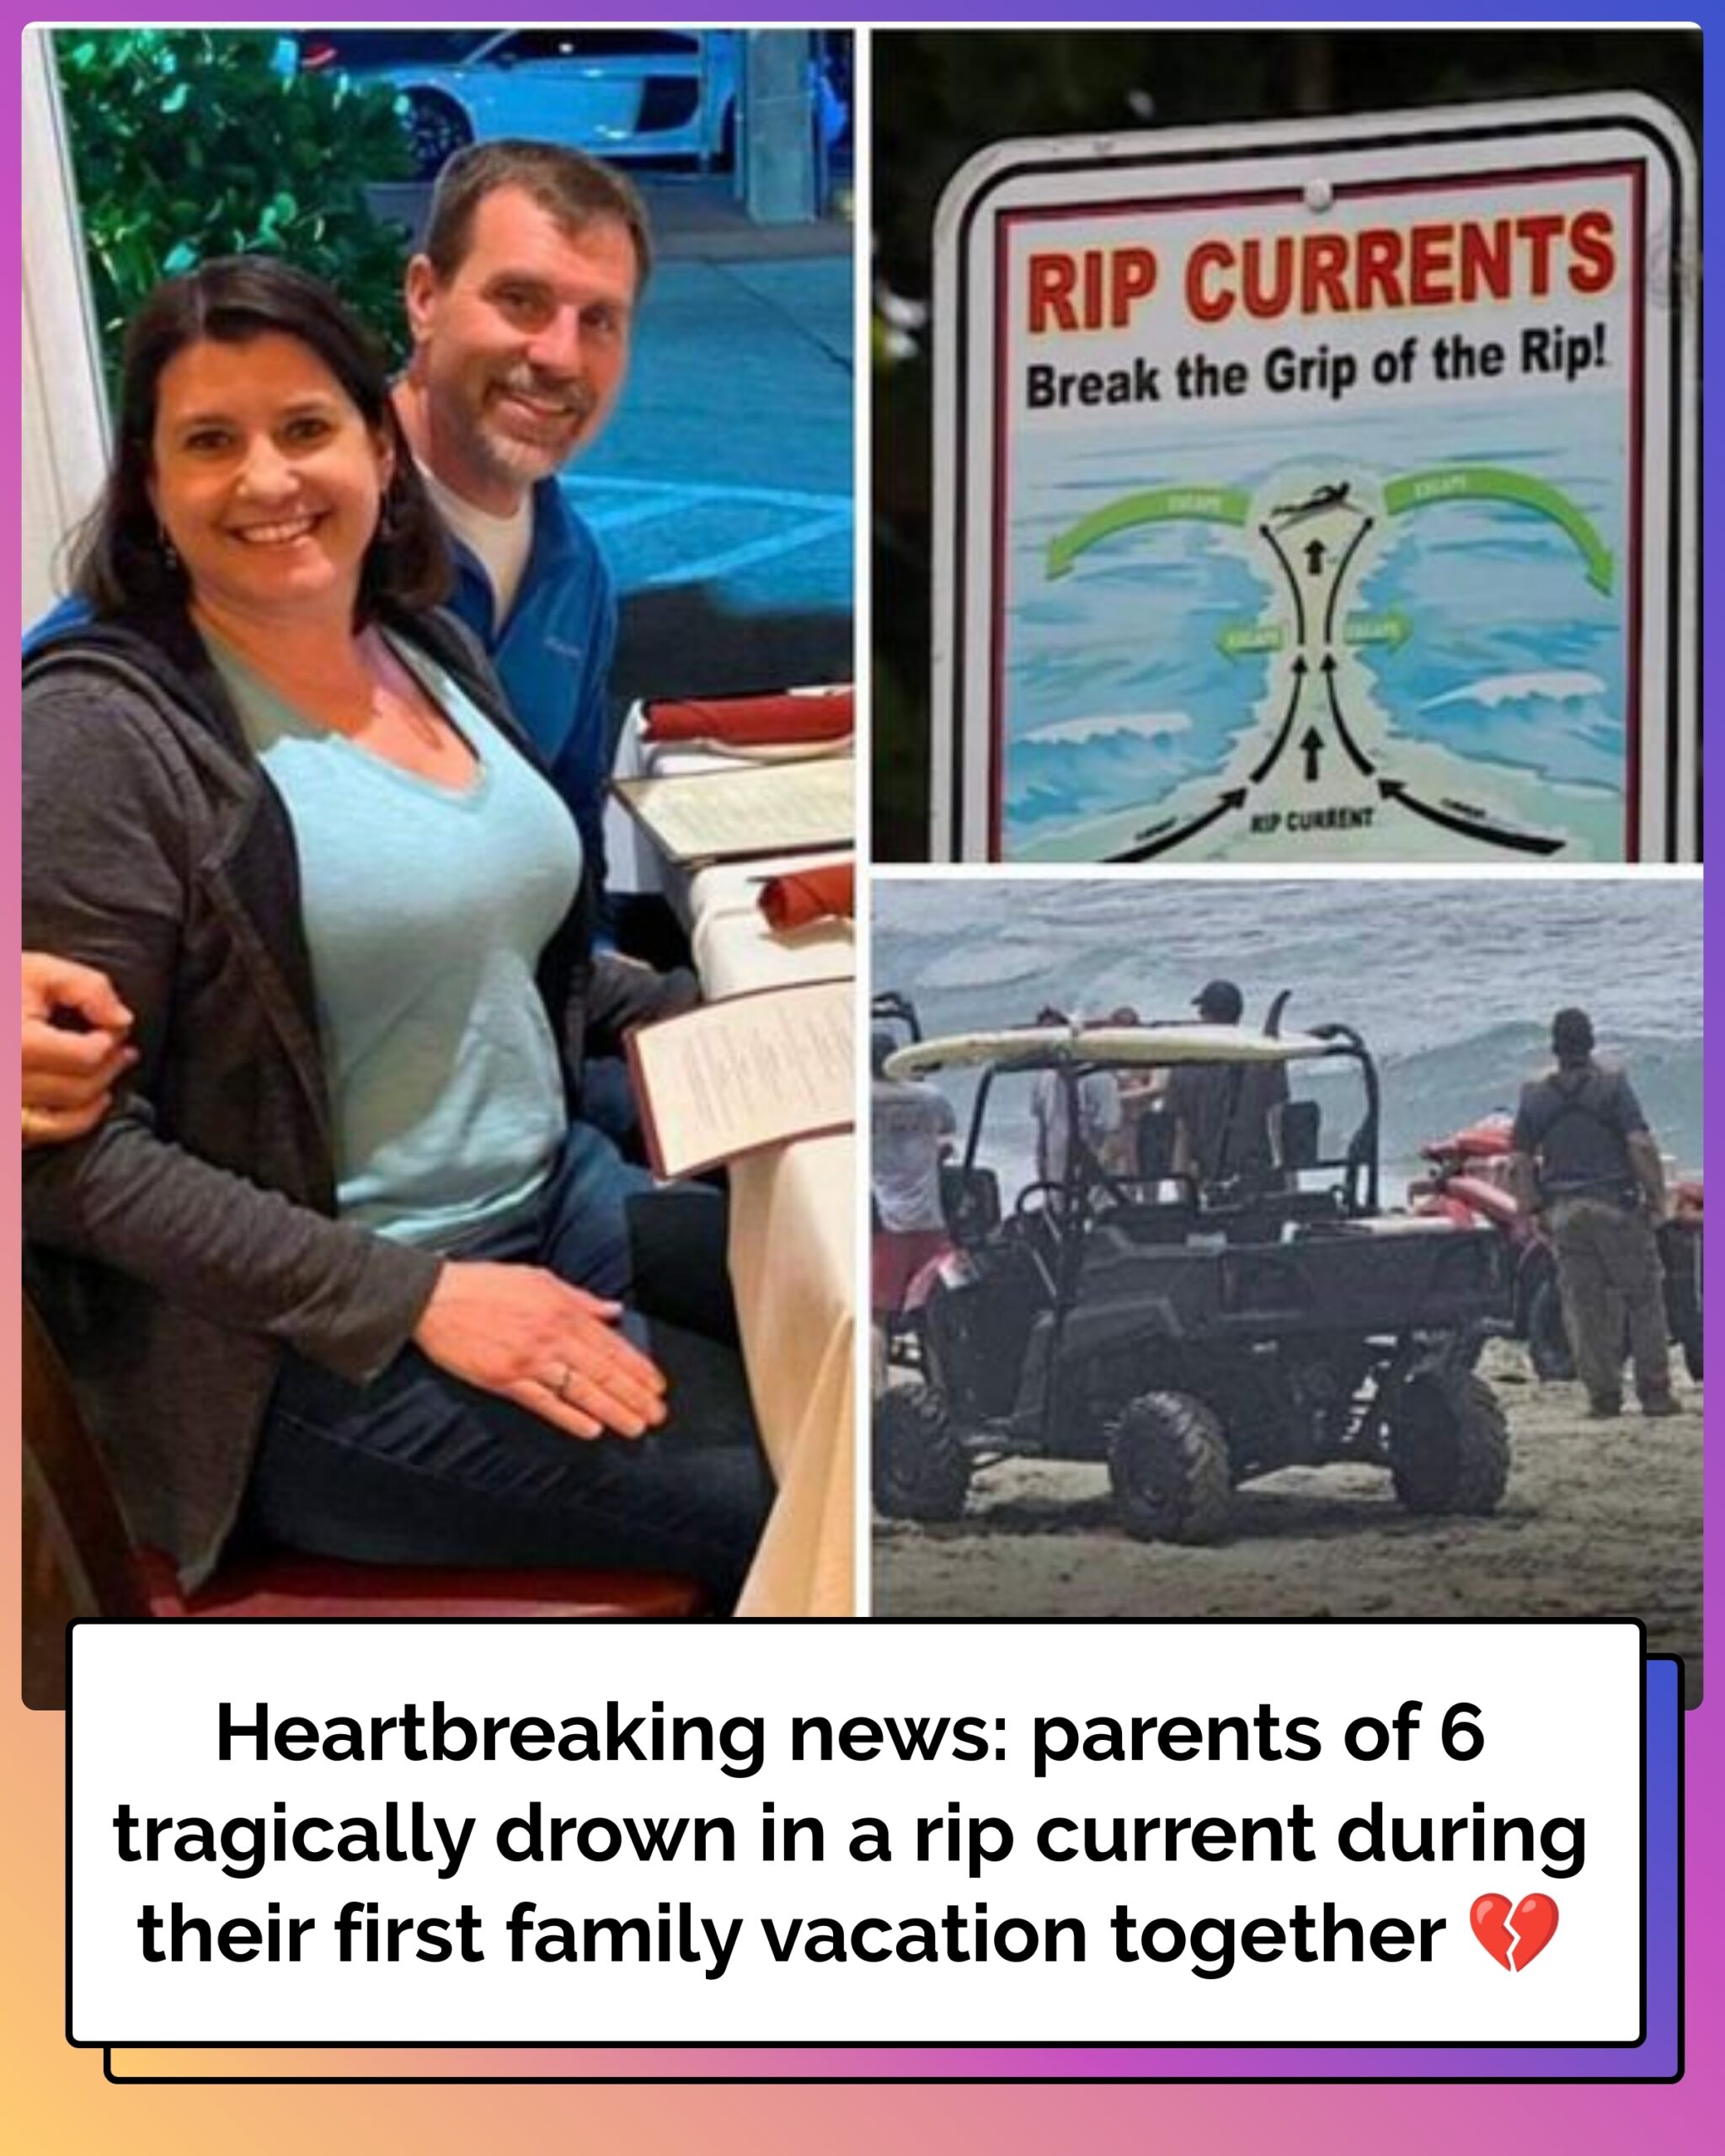 Parents of 6 Die in Rip Current While on First Family Vacation